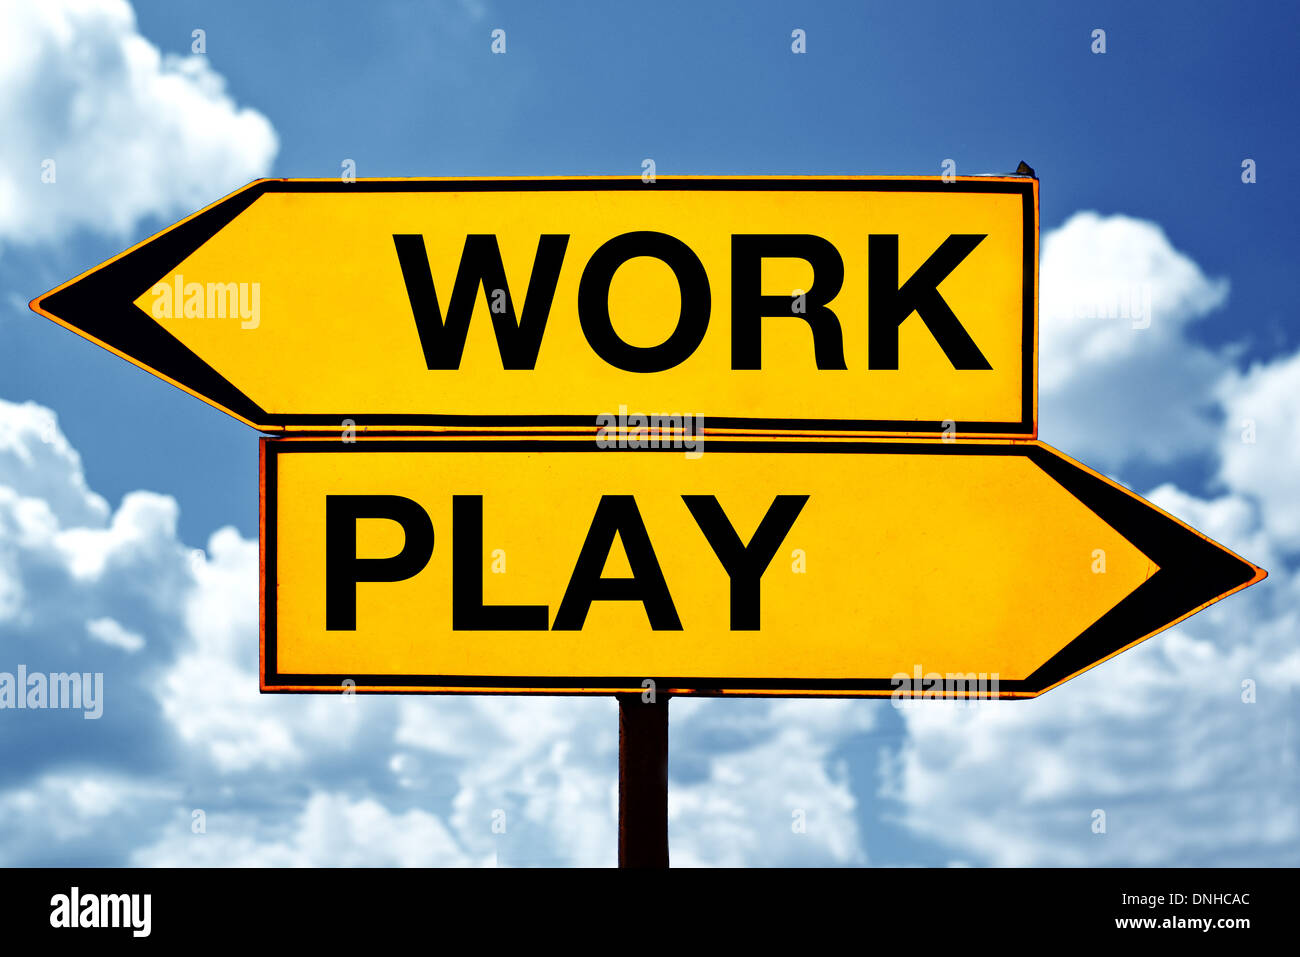 Work or play, opposite signs. Two opposite signs against blue sky background. Stock Photo